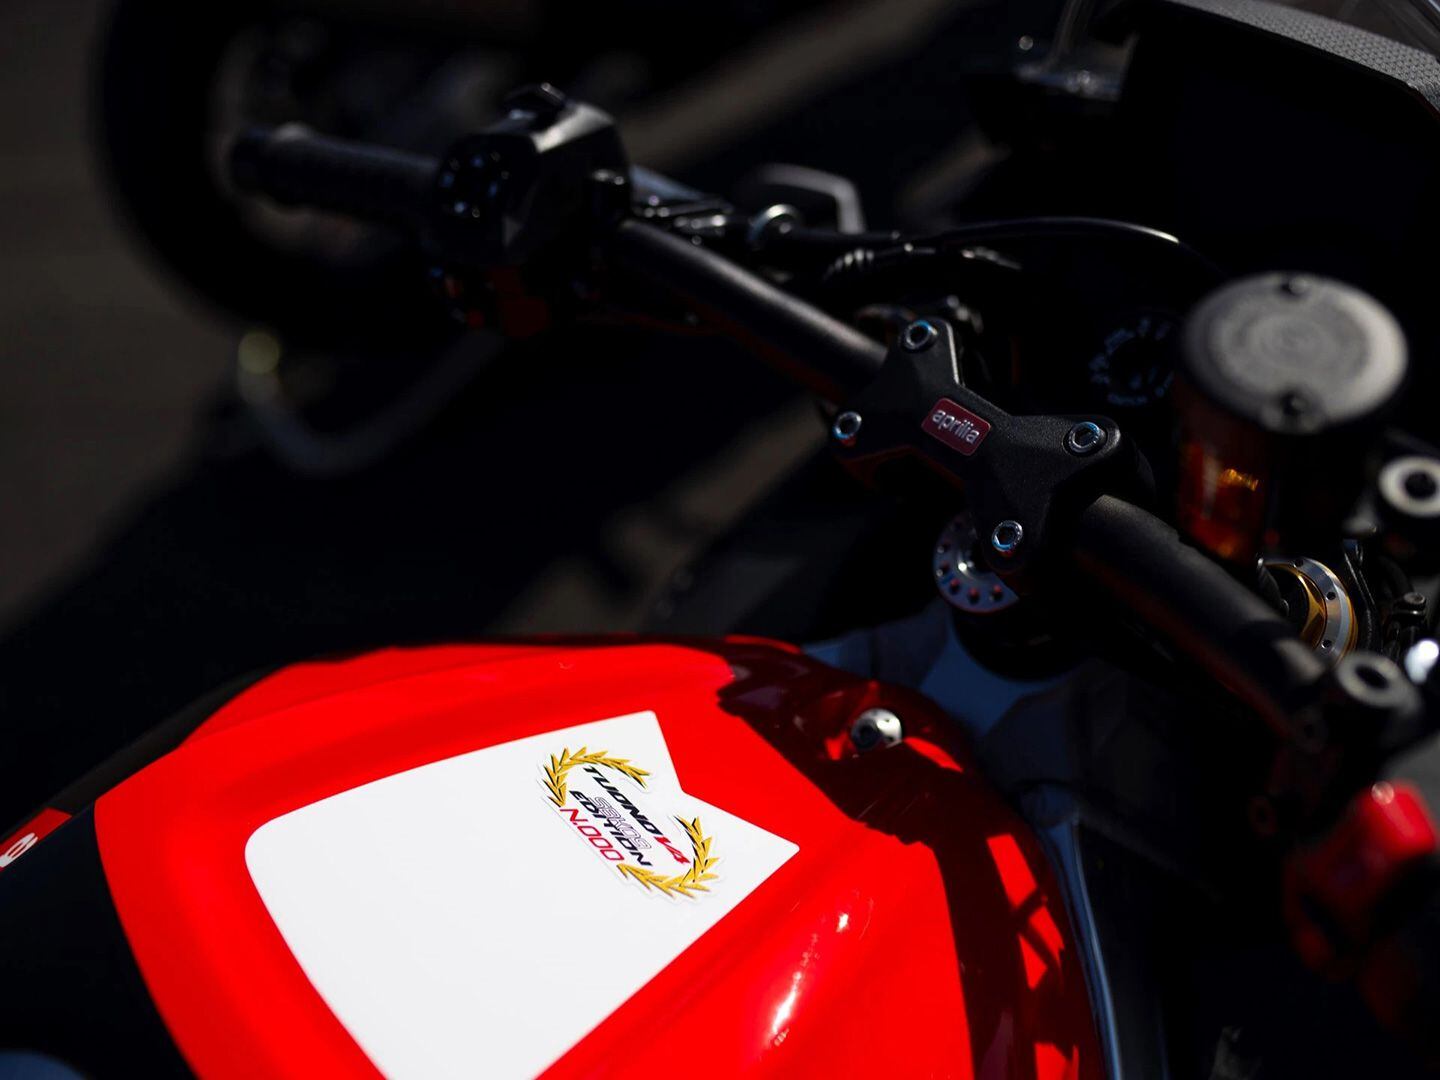 Both bikes also feature a special progressively numbered logo on the fuel tank.